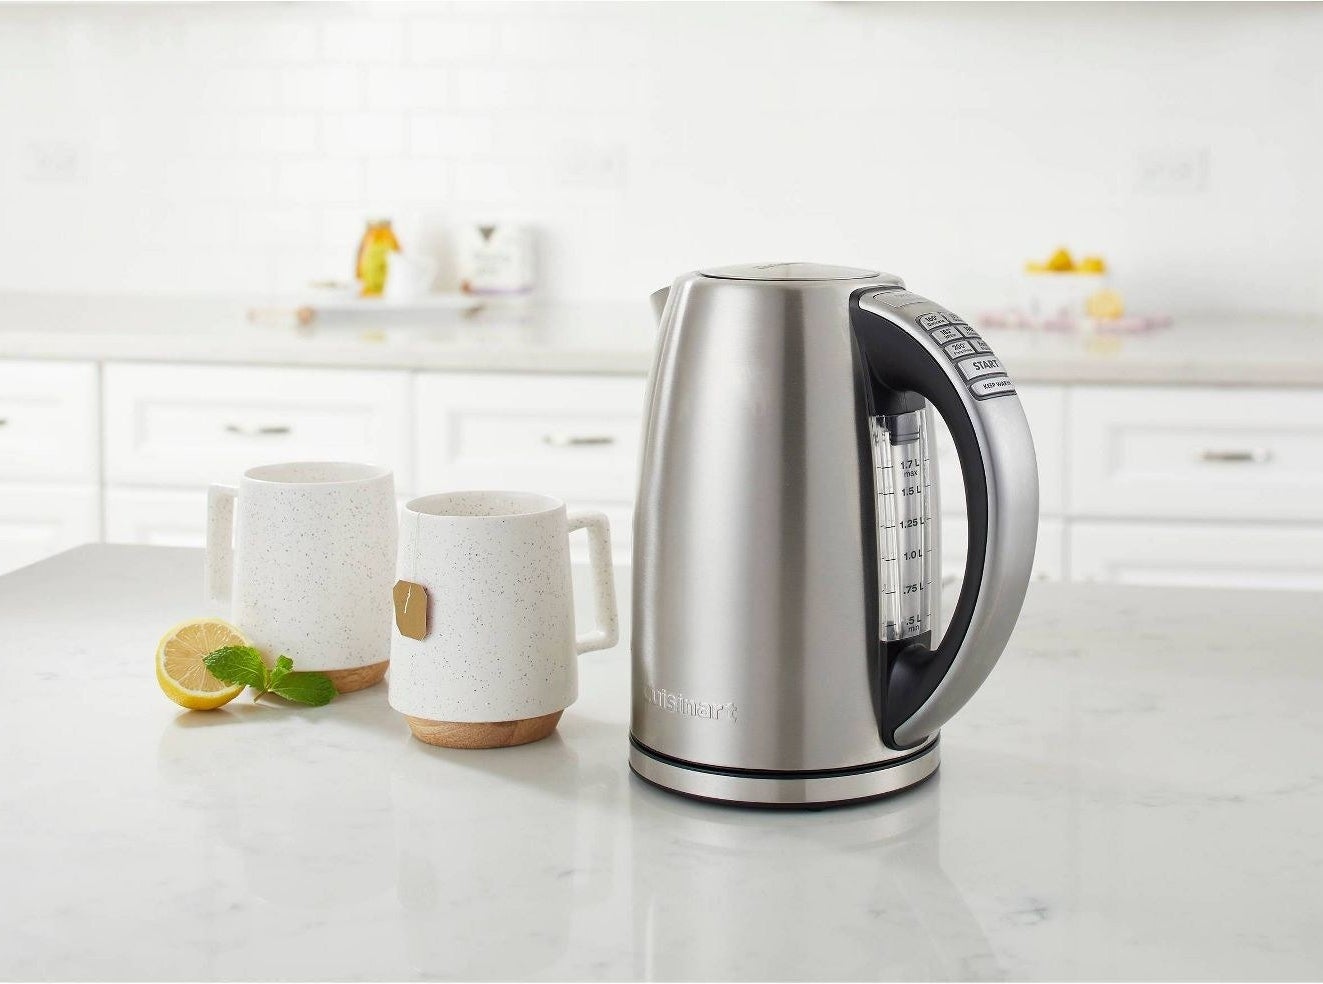 stainless steel electric kettle on counter next to mugs